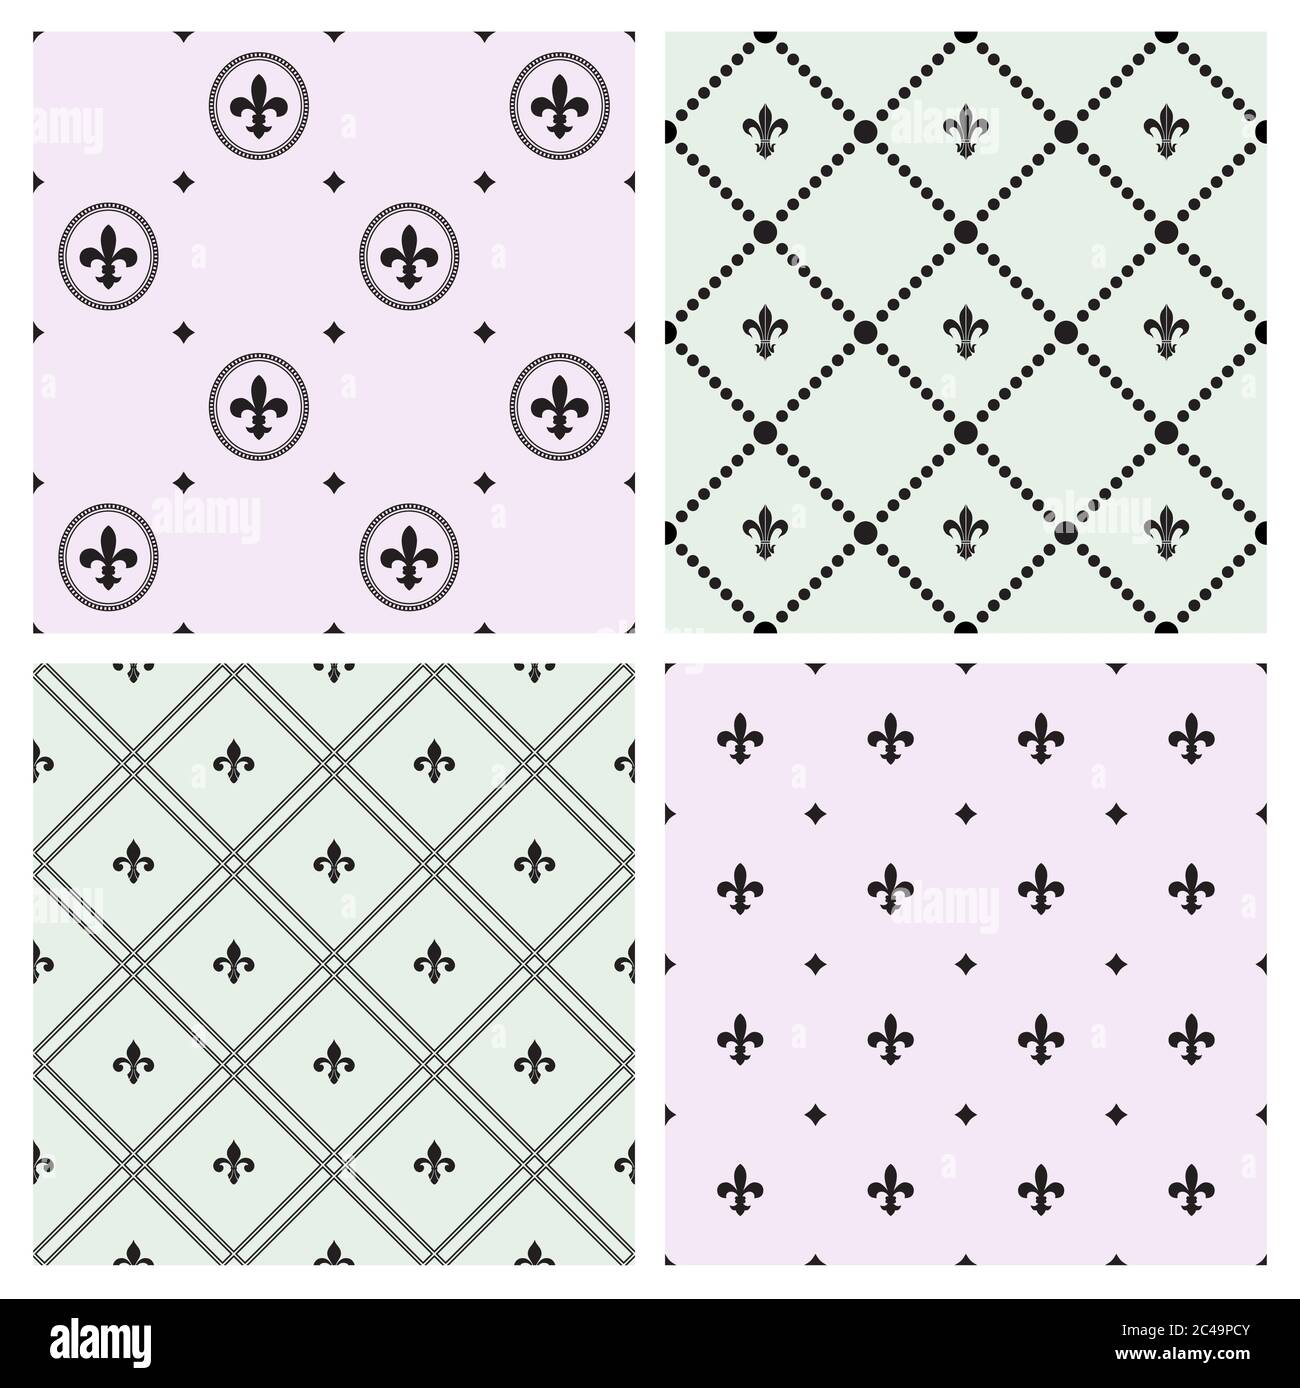 Set of seamless patterns with Fleurs-de-lis icons. Vector illustration. Stock Vector